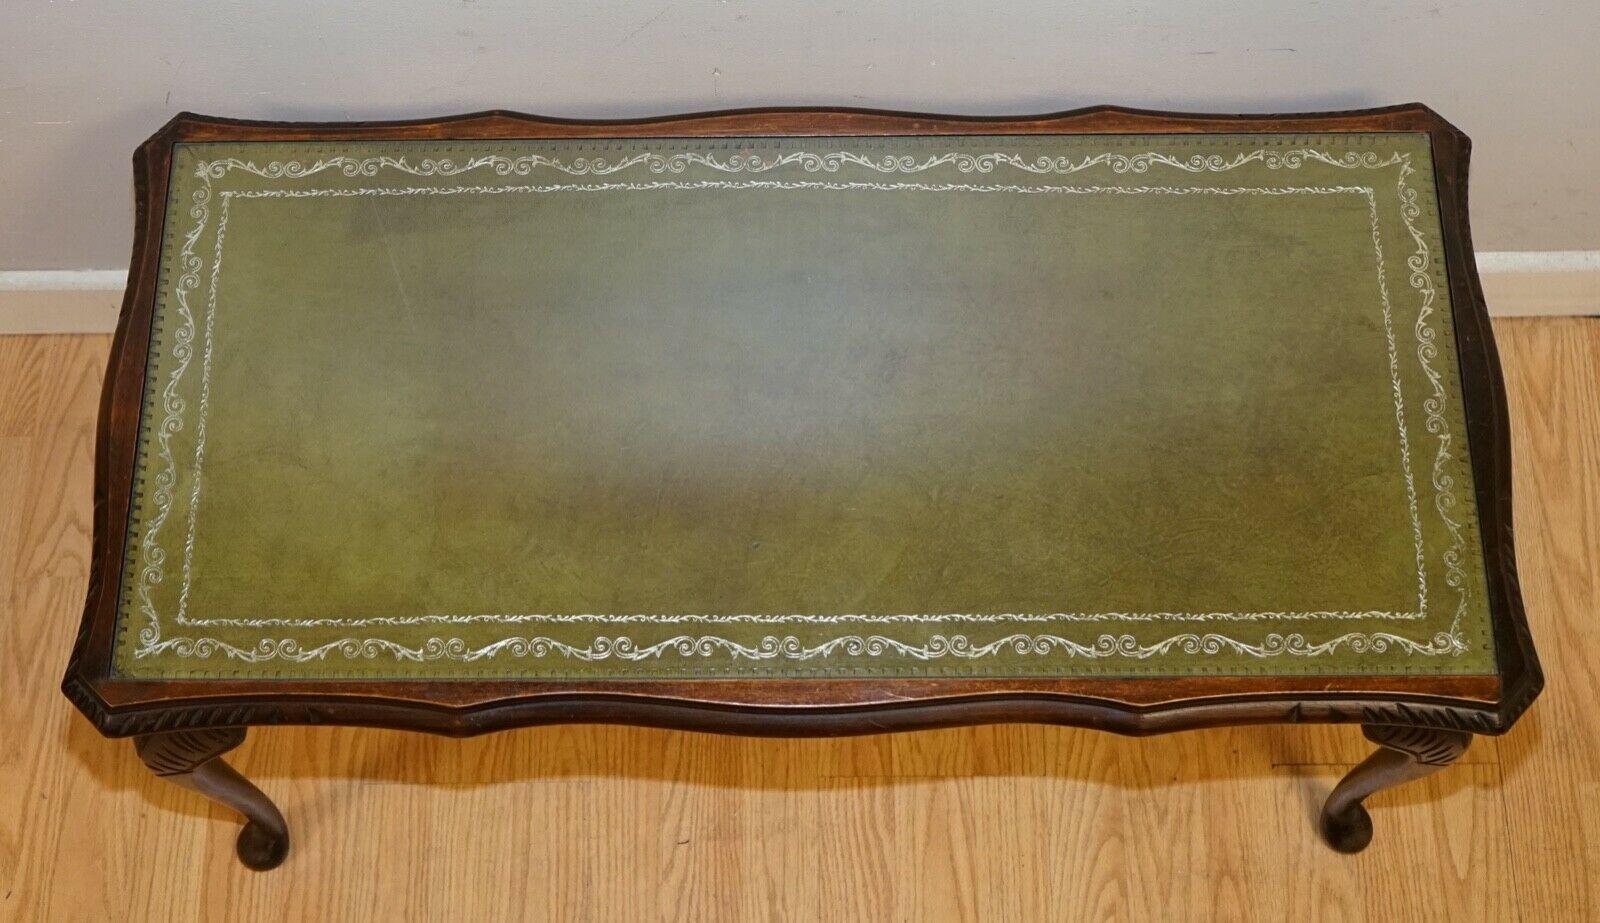 British Vintage Coffee Table with Embossed Green Leather Top on Elegant Queen Anne Legs